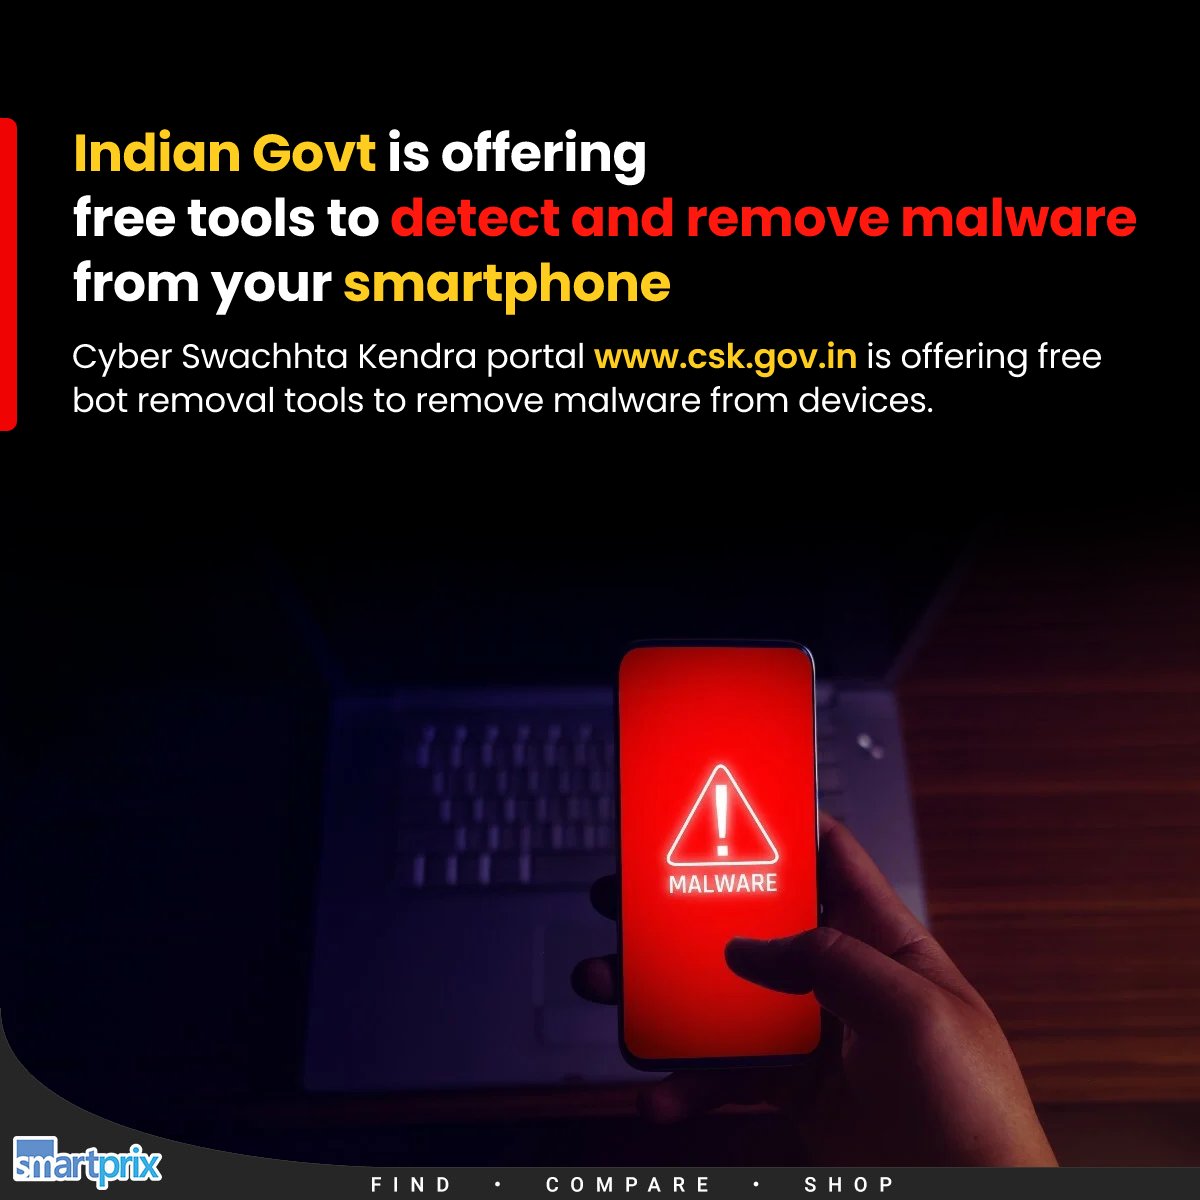 Government is offering free tools to protect against malware attacks and scams.

#Govt #Malware #Smartphones #CyberSwachhtaKendra